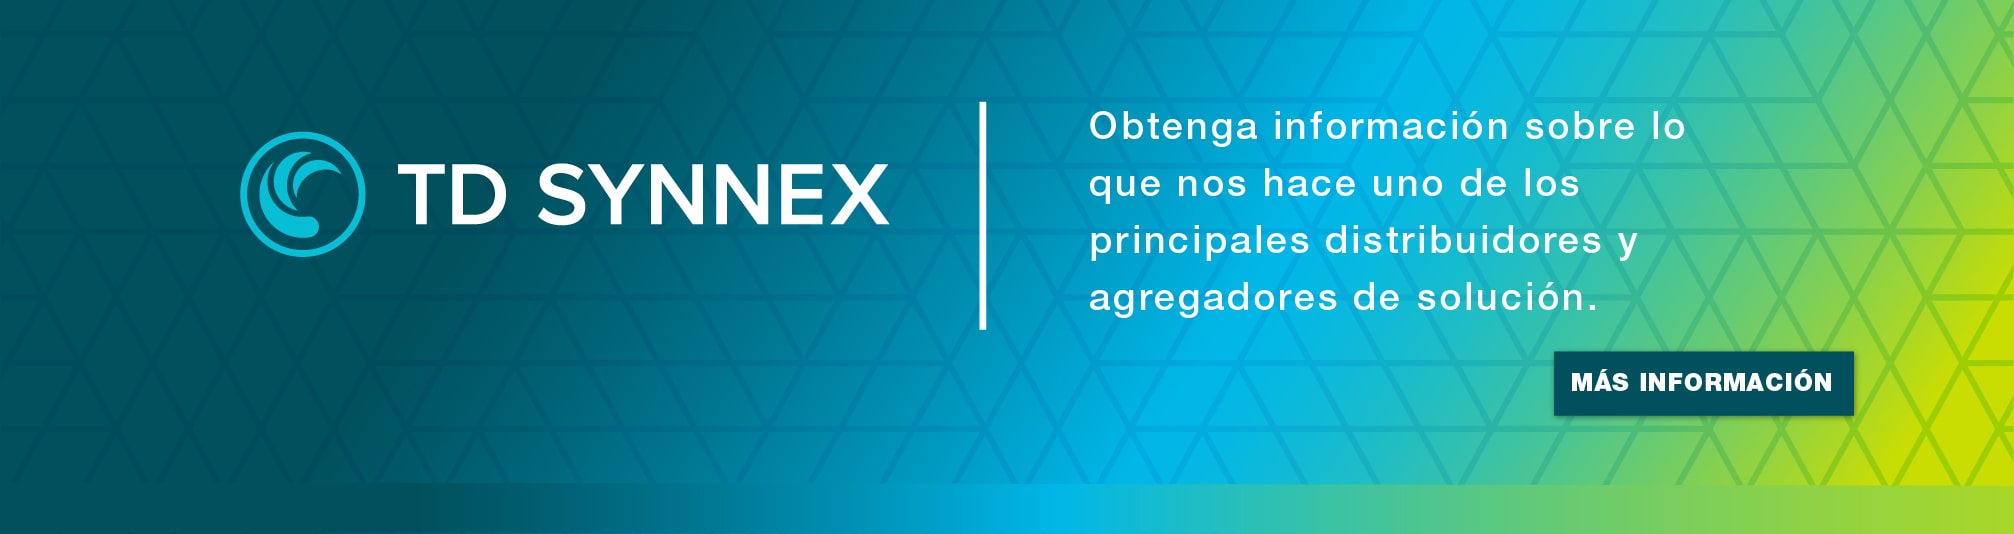 TD SYNNEX EXPRESS Chile - TD SYNNEX about us